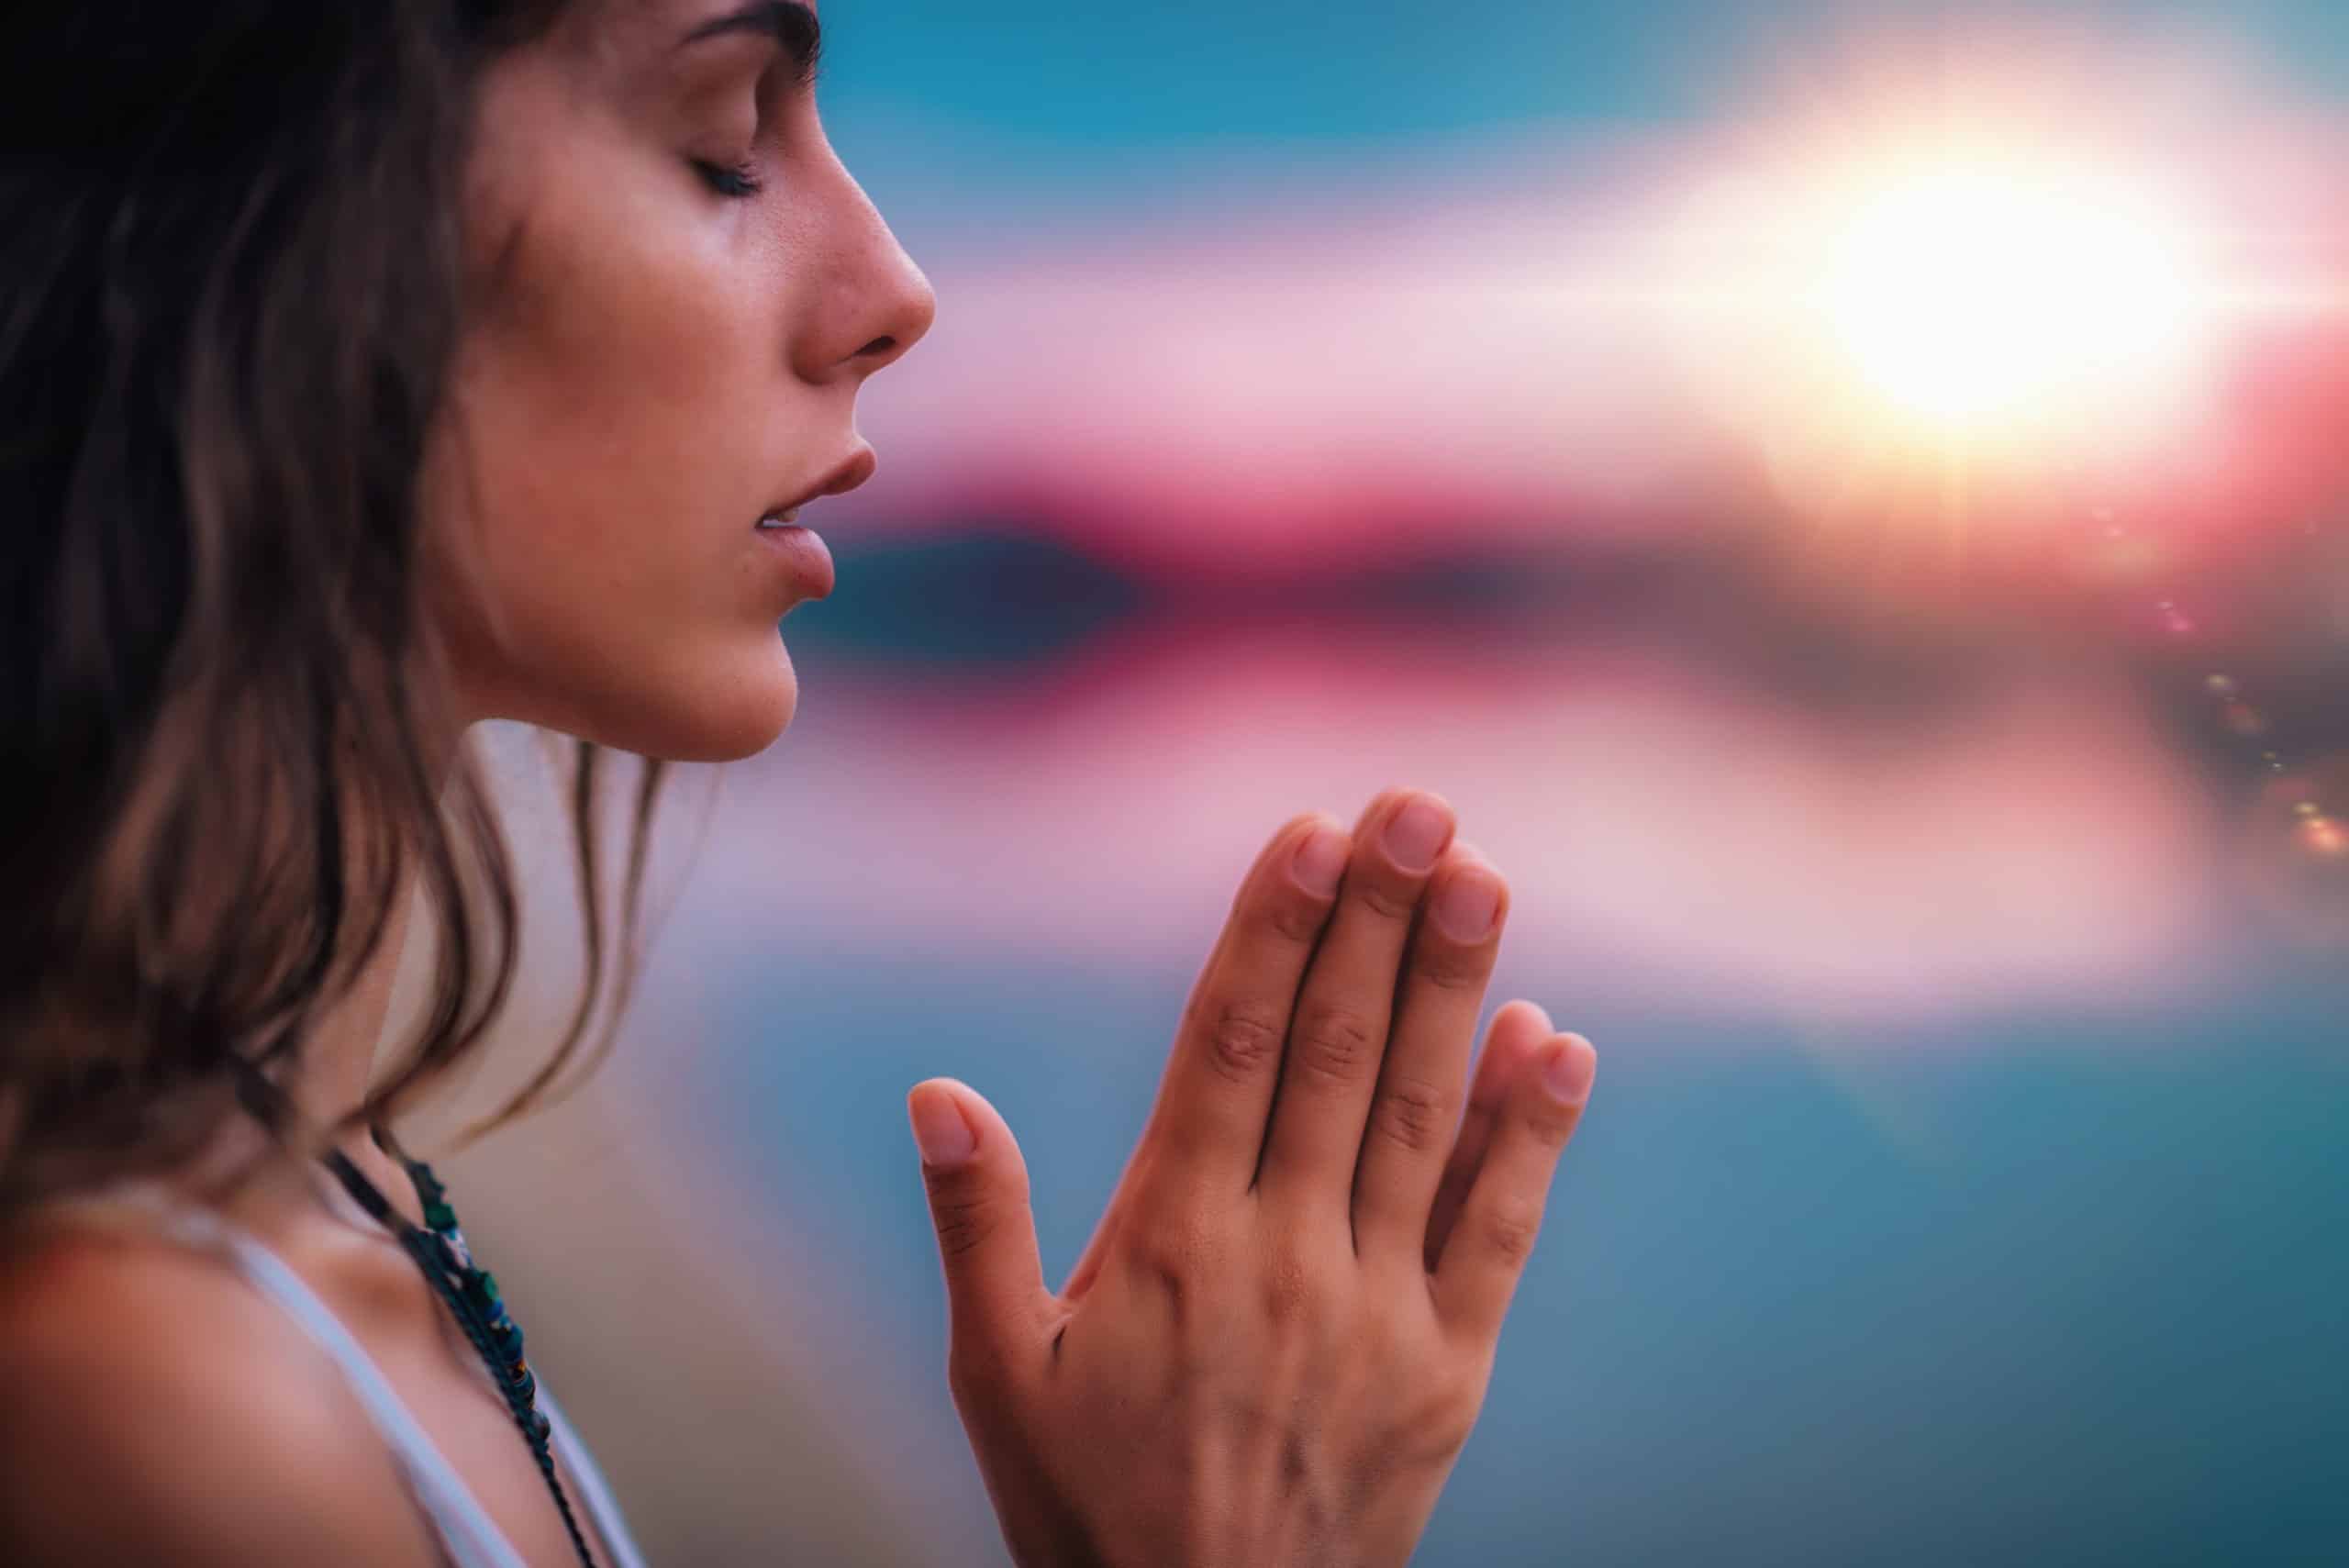 Woman eyes closed, hands clasped together in prayer position outdoors.